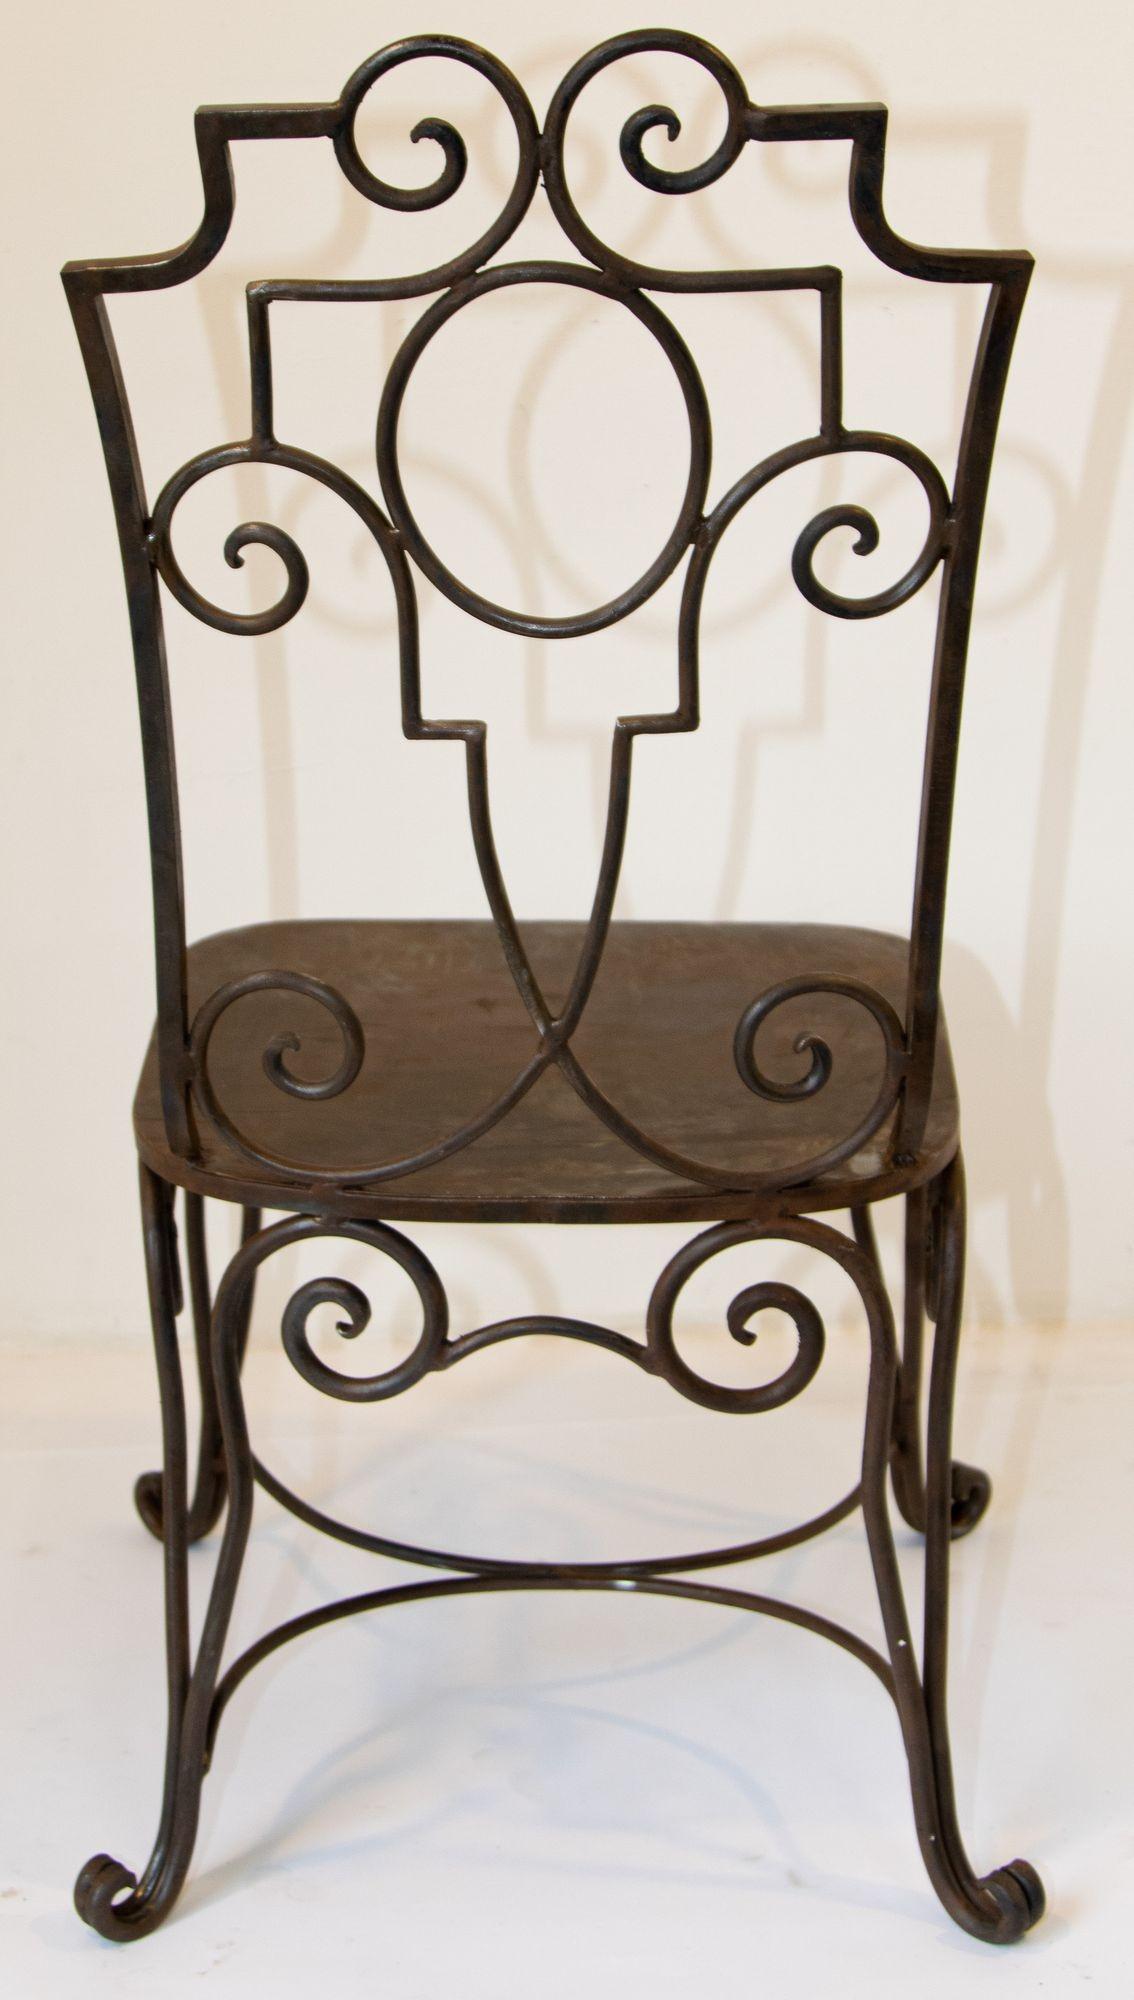 Jean-Charles Moreux style hand forged wrought iron Hollywood Regency accent garden chair.
The side chair is very well made; sturdy and heavy, wrought iron hand forges of unusual decorative pattern.
Featuring curvaceous use of hammered wrought iron